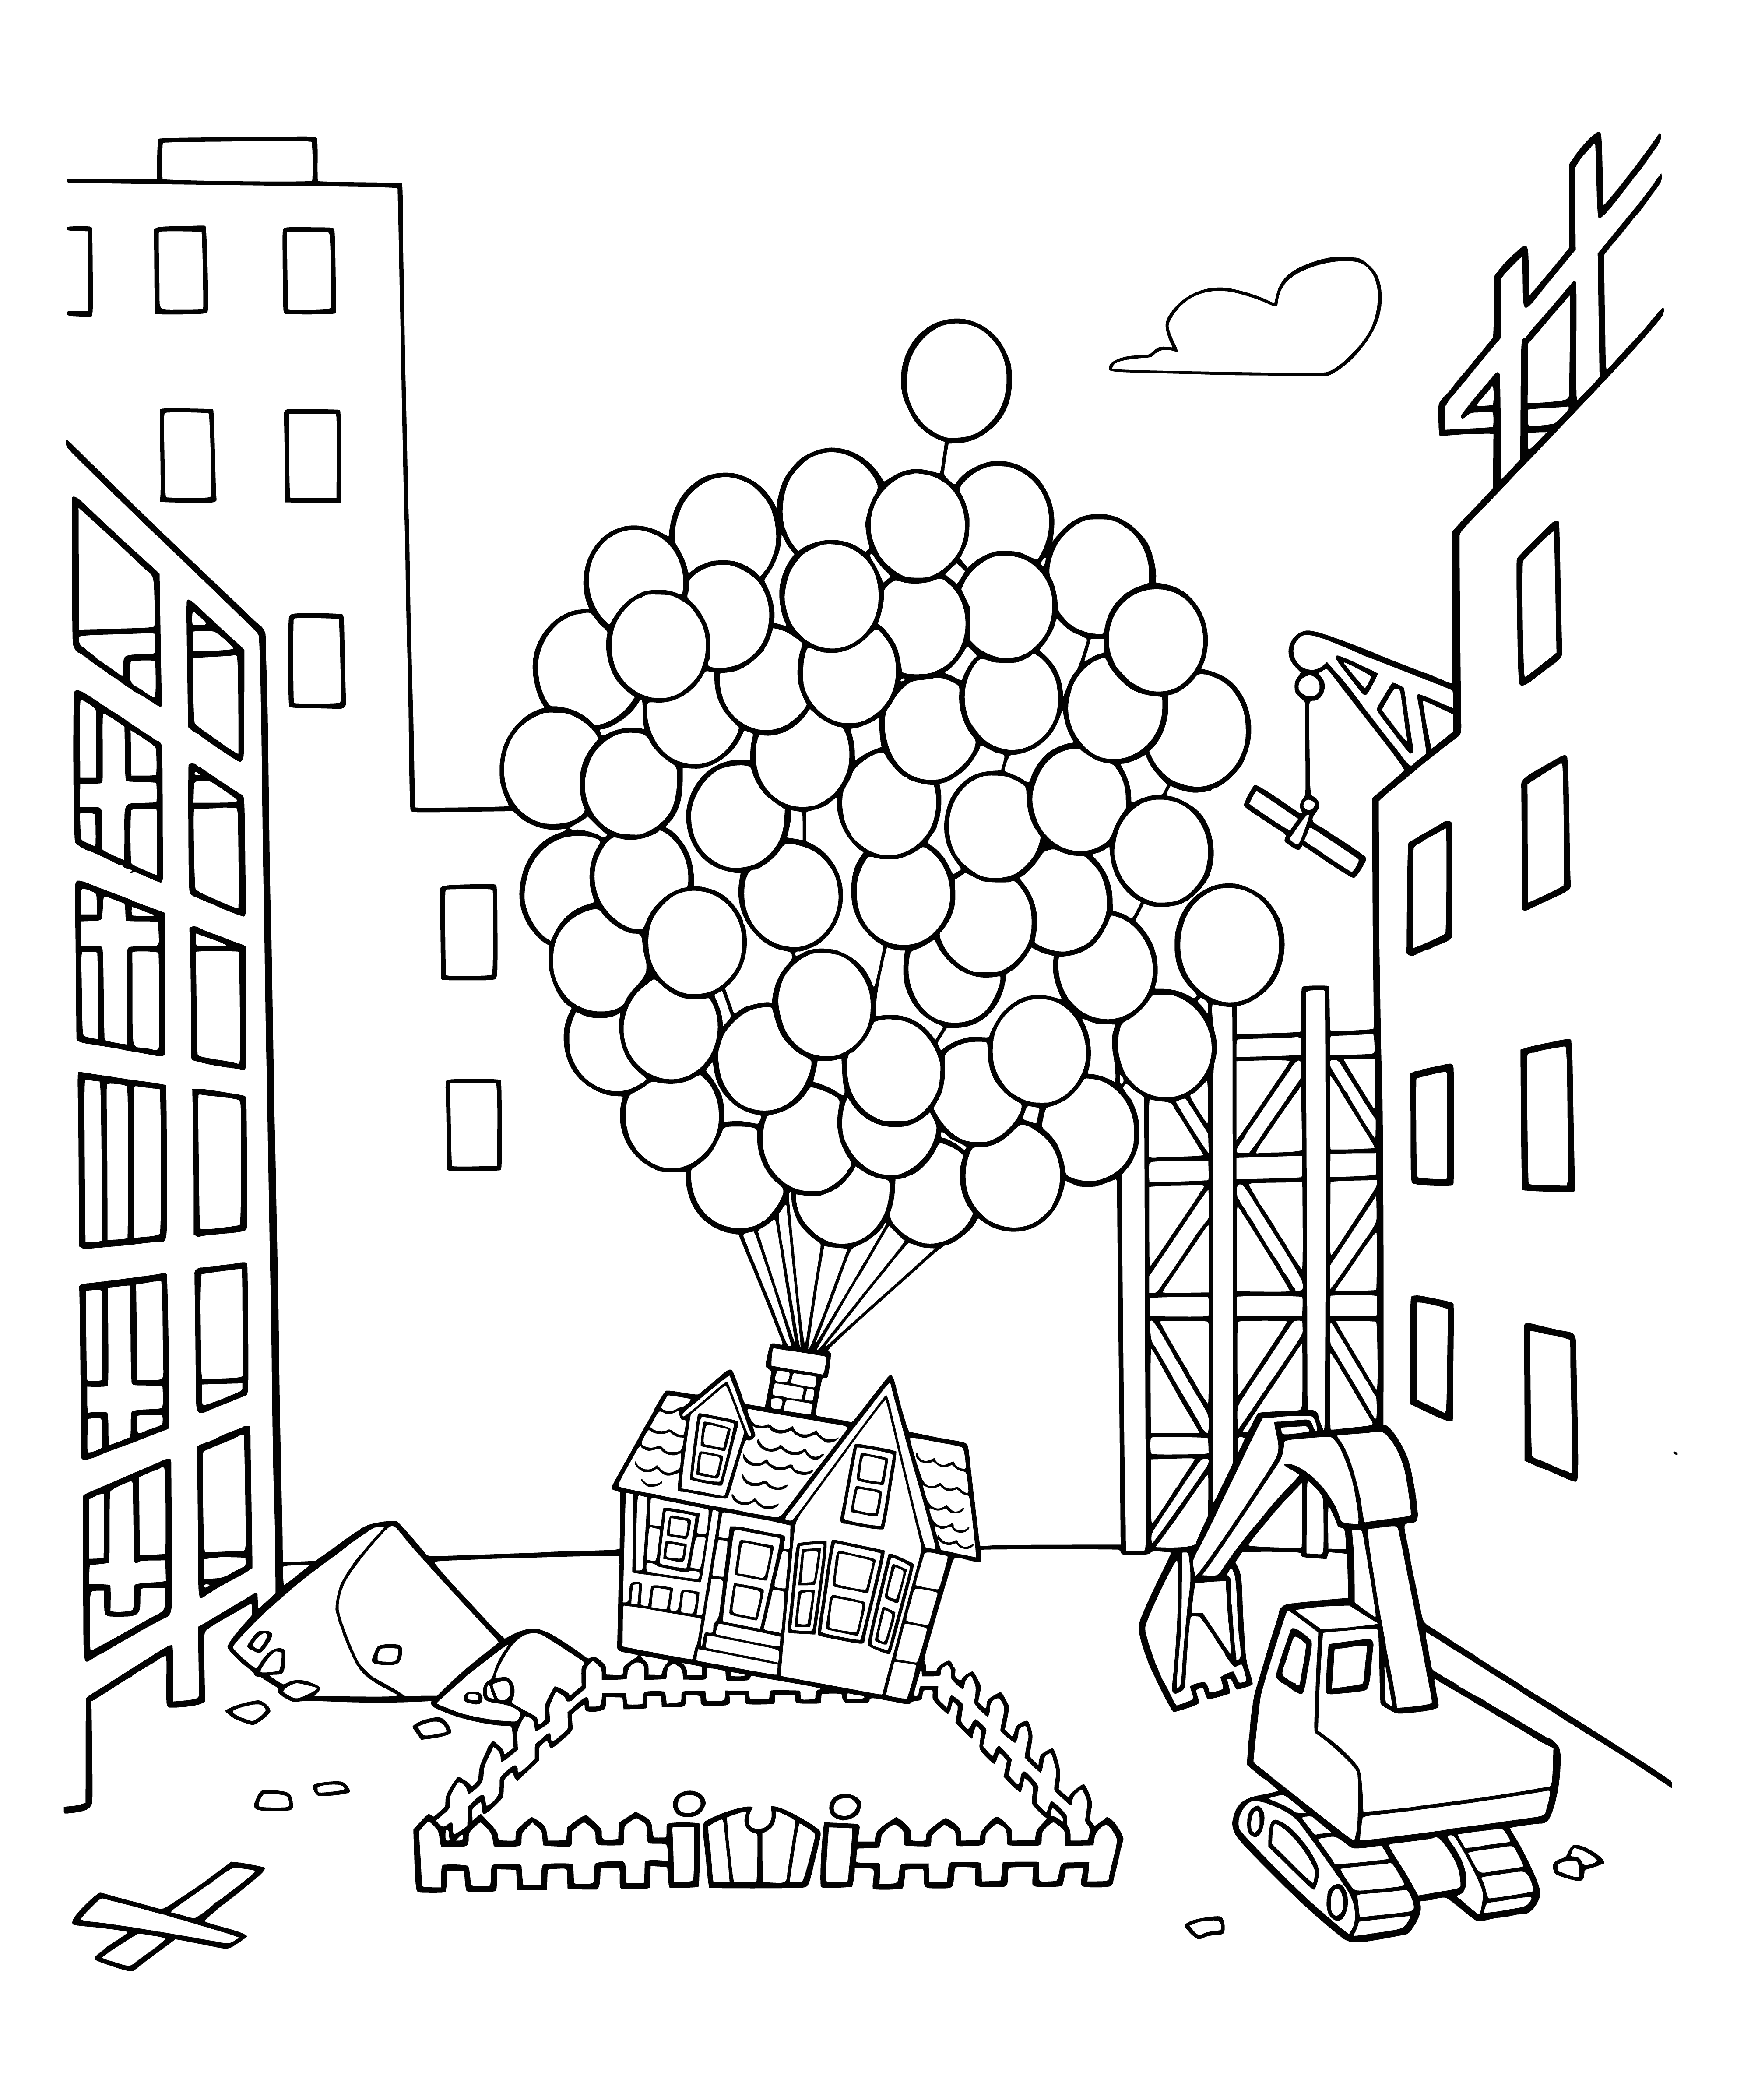 coloring page: A rainbow appears while a flock of birds is singing.

A house is soaring in the sky, sun shining, rainbow and birds singing.